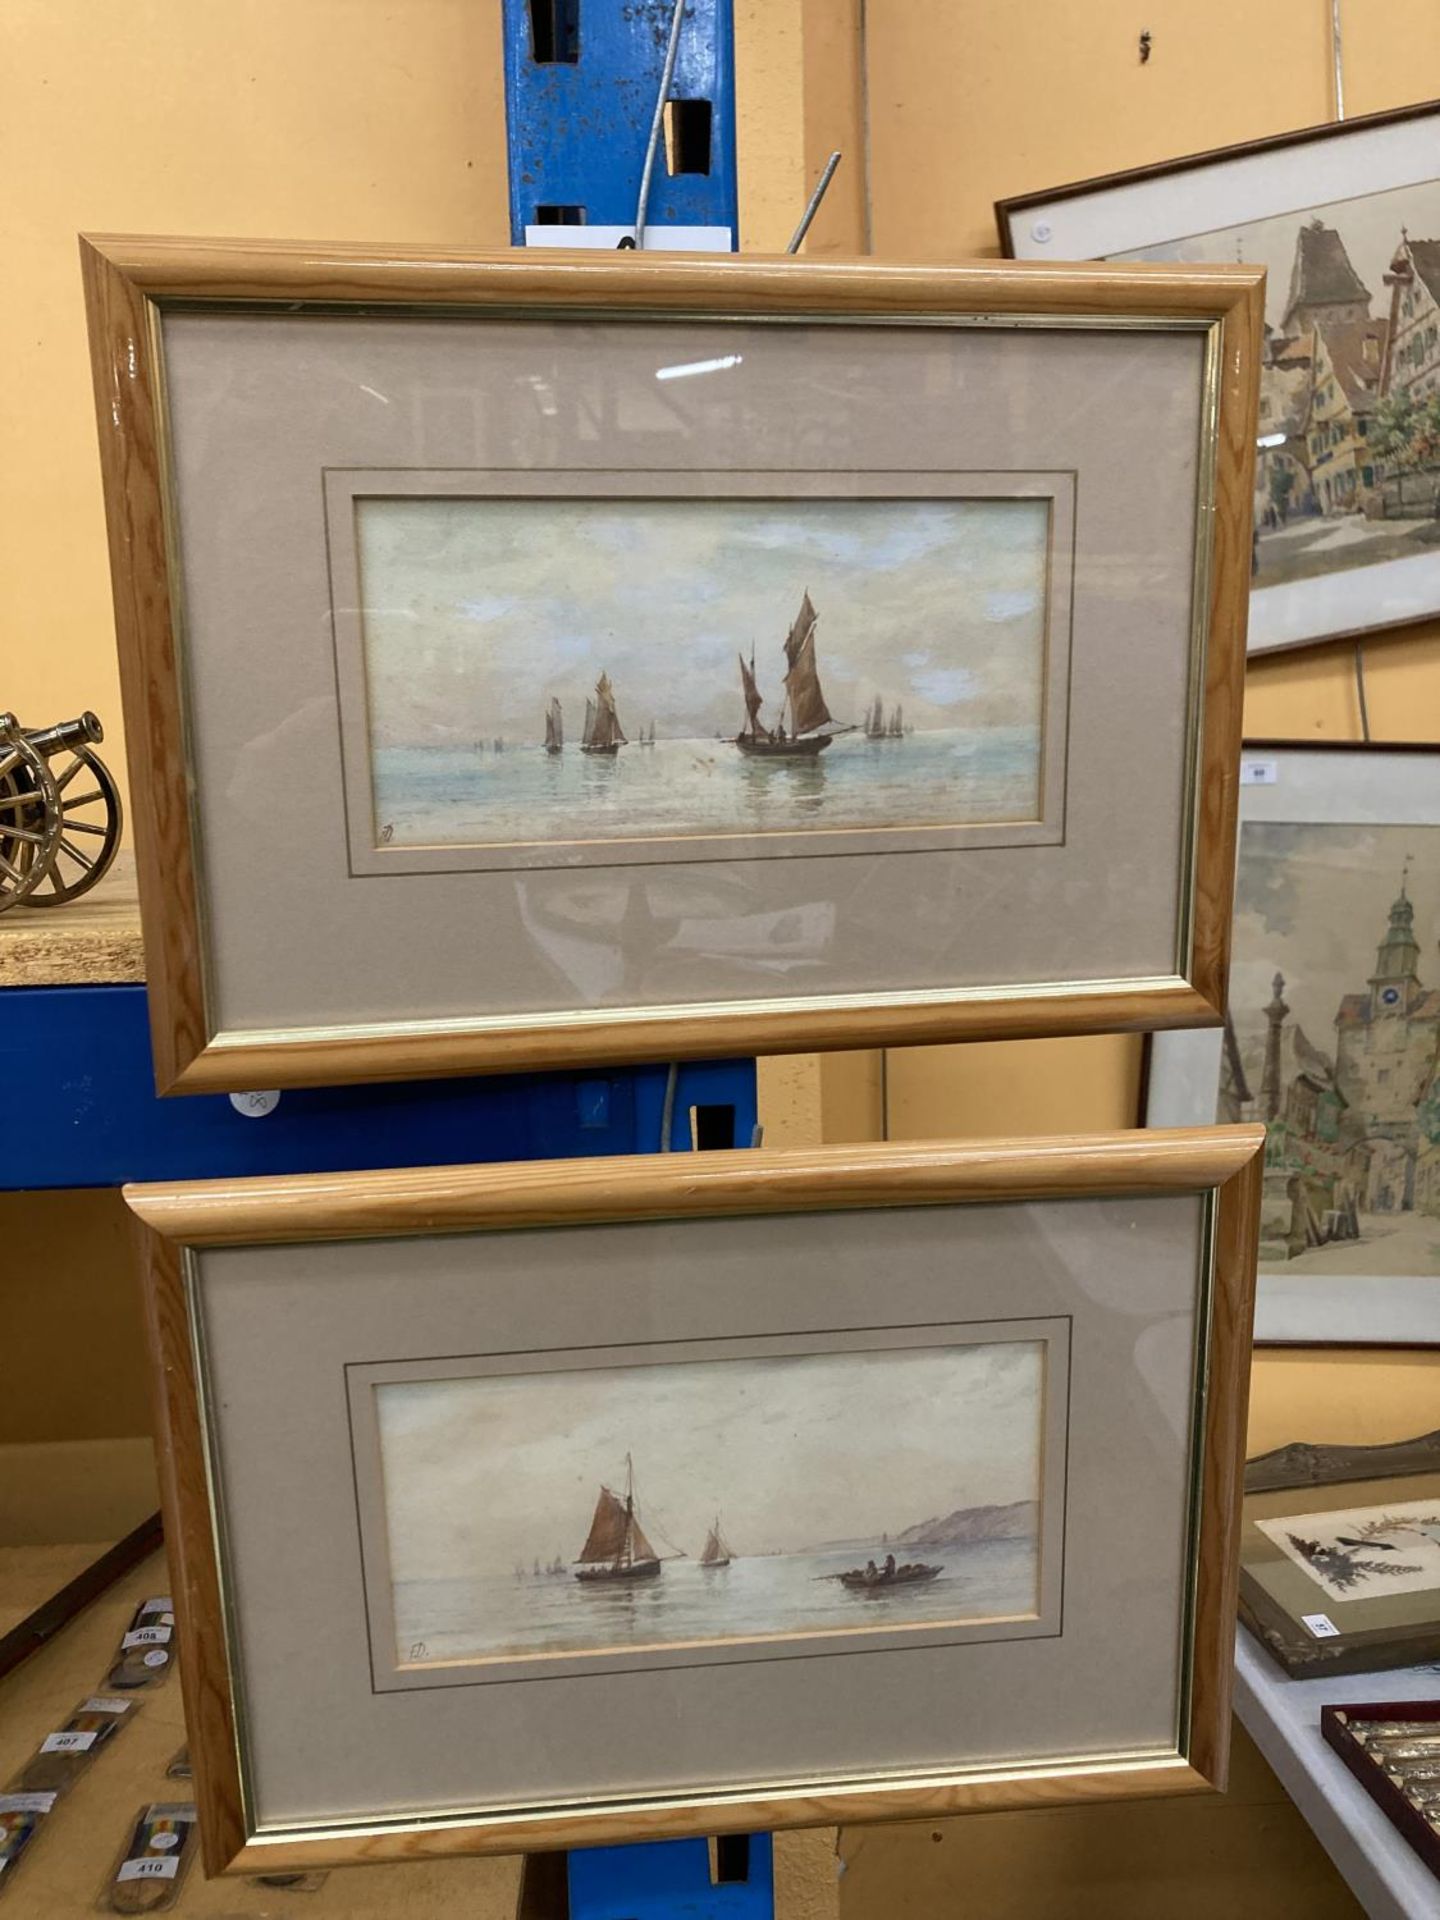 TWO FRAMED WATERCOLOURS OF BOAT SCENES SIGNED F.D